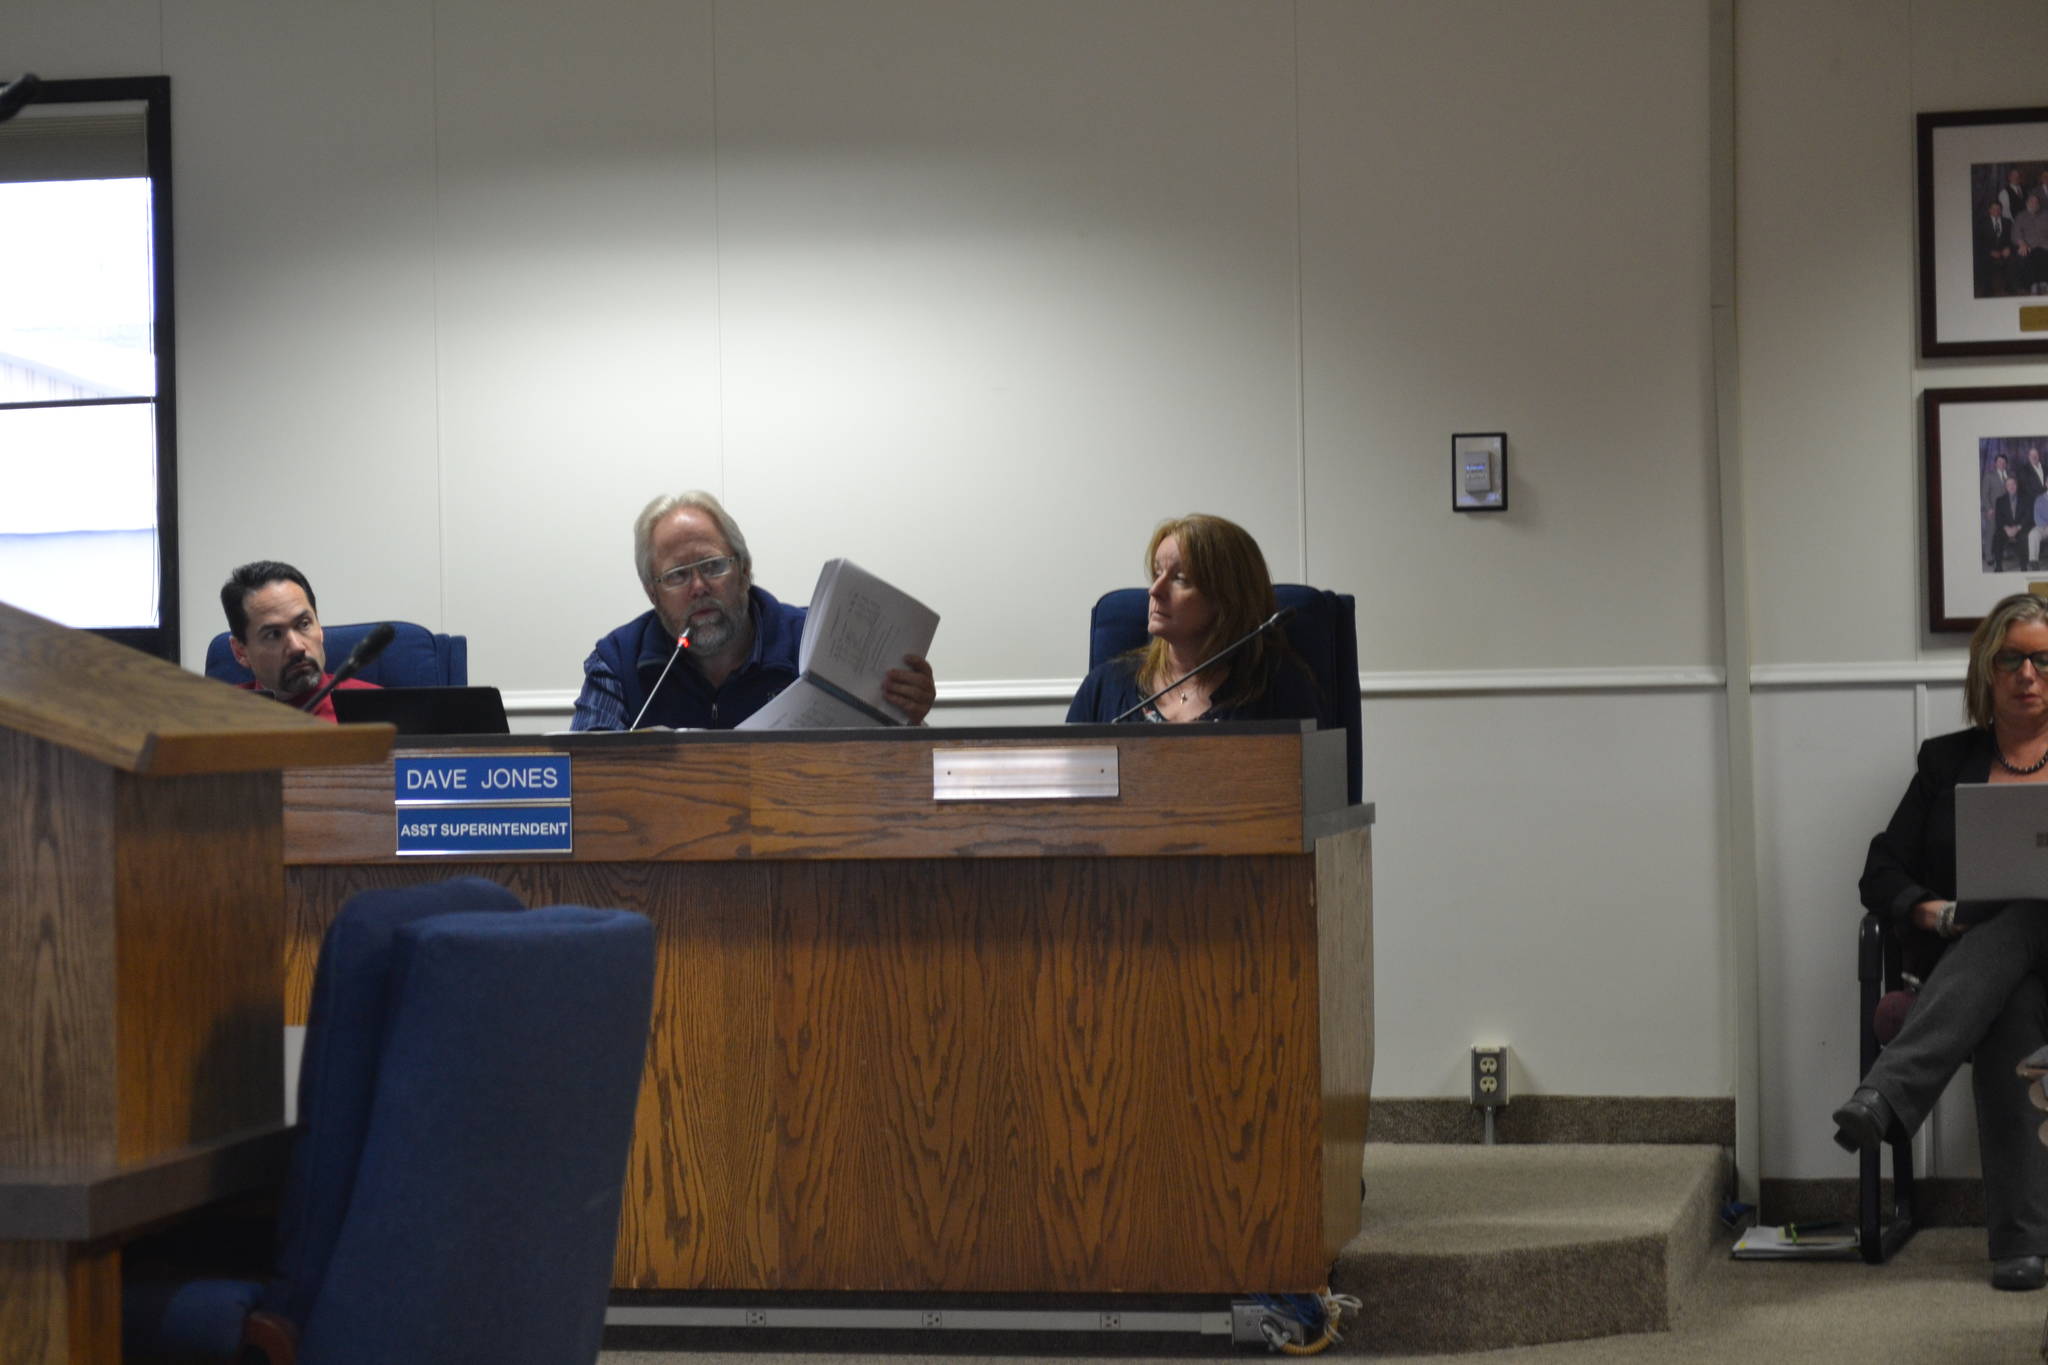 Kenai Peninsula Borough School District Assistant Superintendent presents an update to the Kenai Peninsula Borough School District Board of Education on the district’s upcoming budget on Thursday, March 21, 2019, in Soldotna, Alaska. (Photo by Victoria Petersen/Peninsula Clarion)